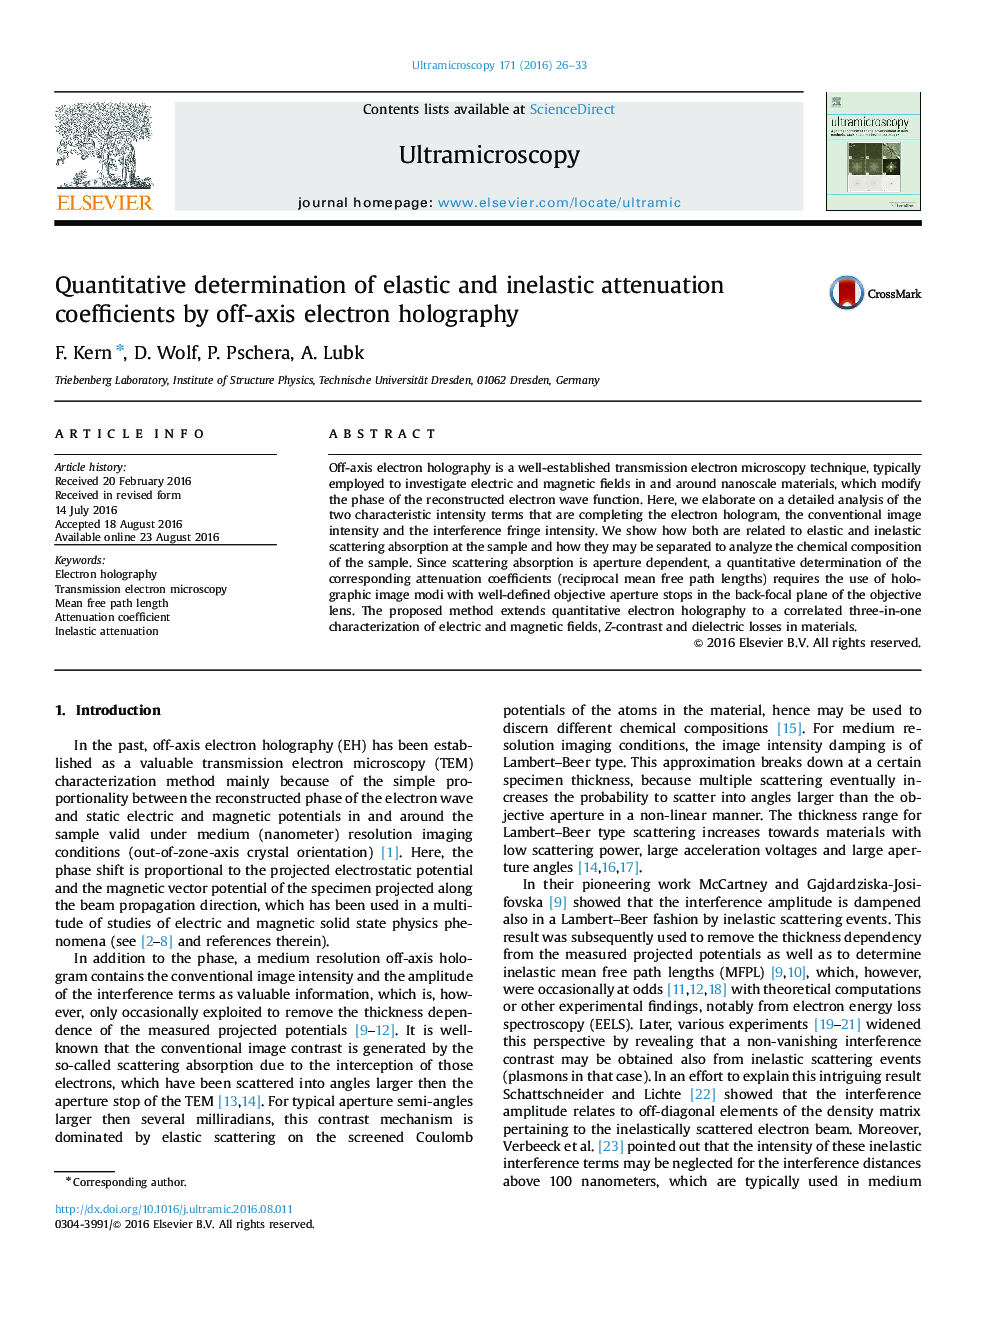 Quantitative determination of elastic and inelastic attenuation coefficients by off-axis electron holography